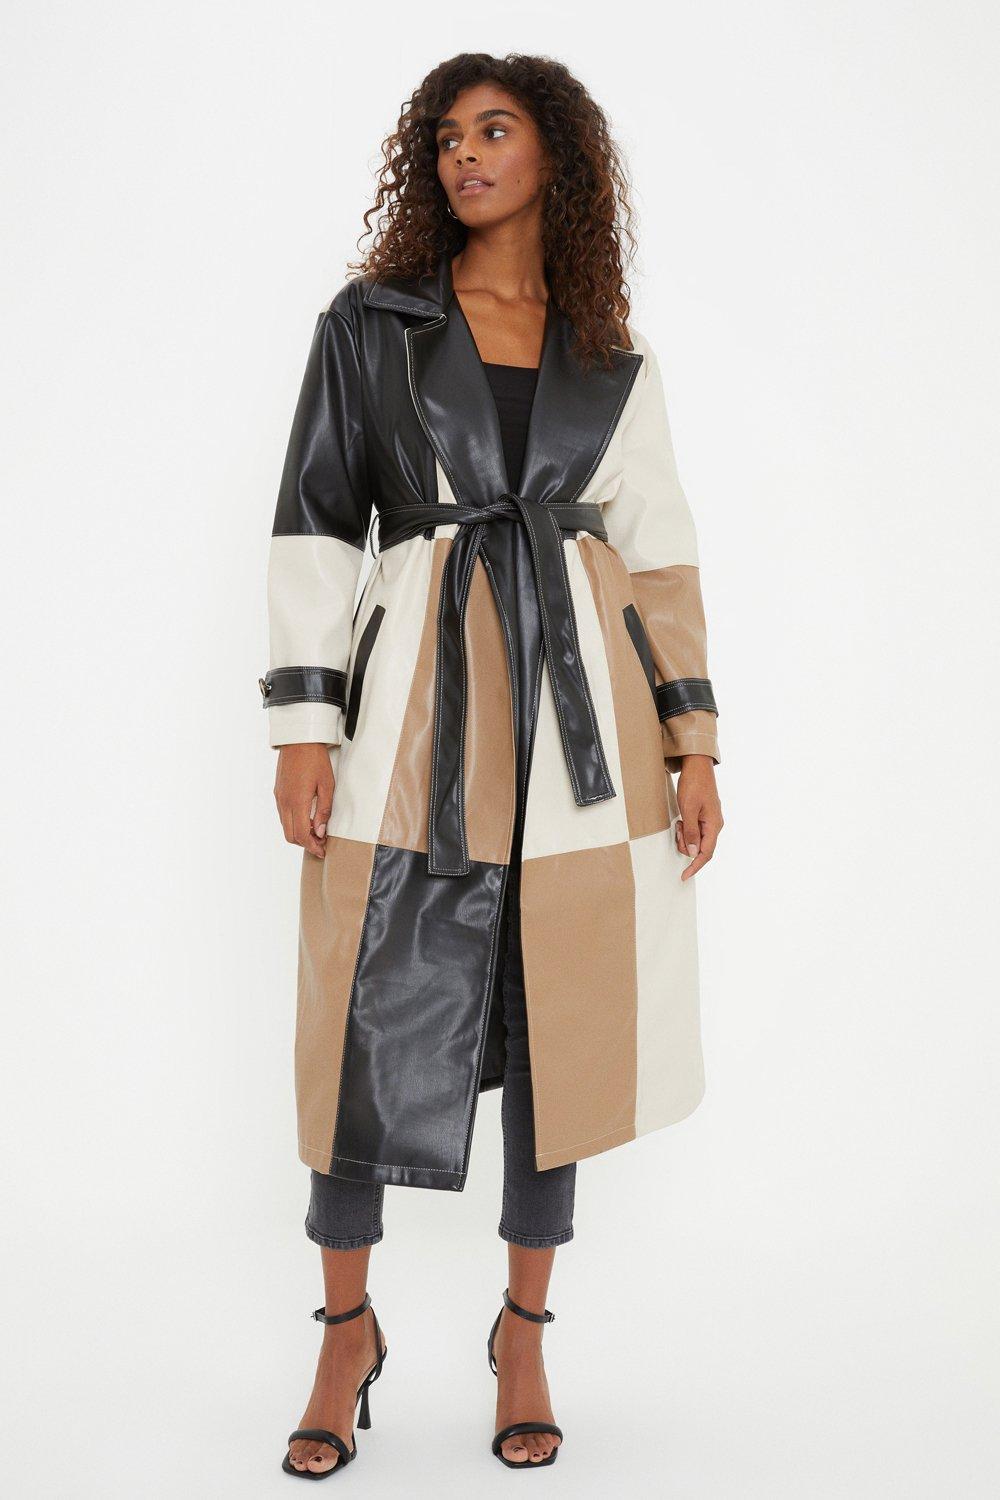 Women’s Faux Leather Patchwork Trench Coat - multi - L